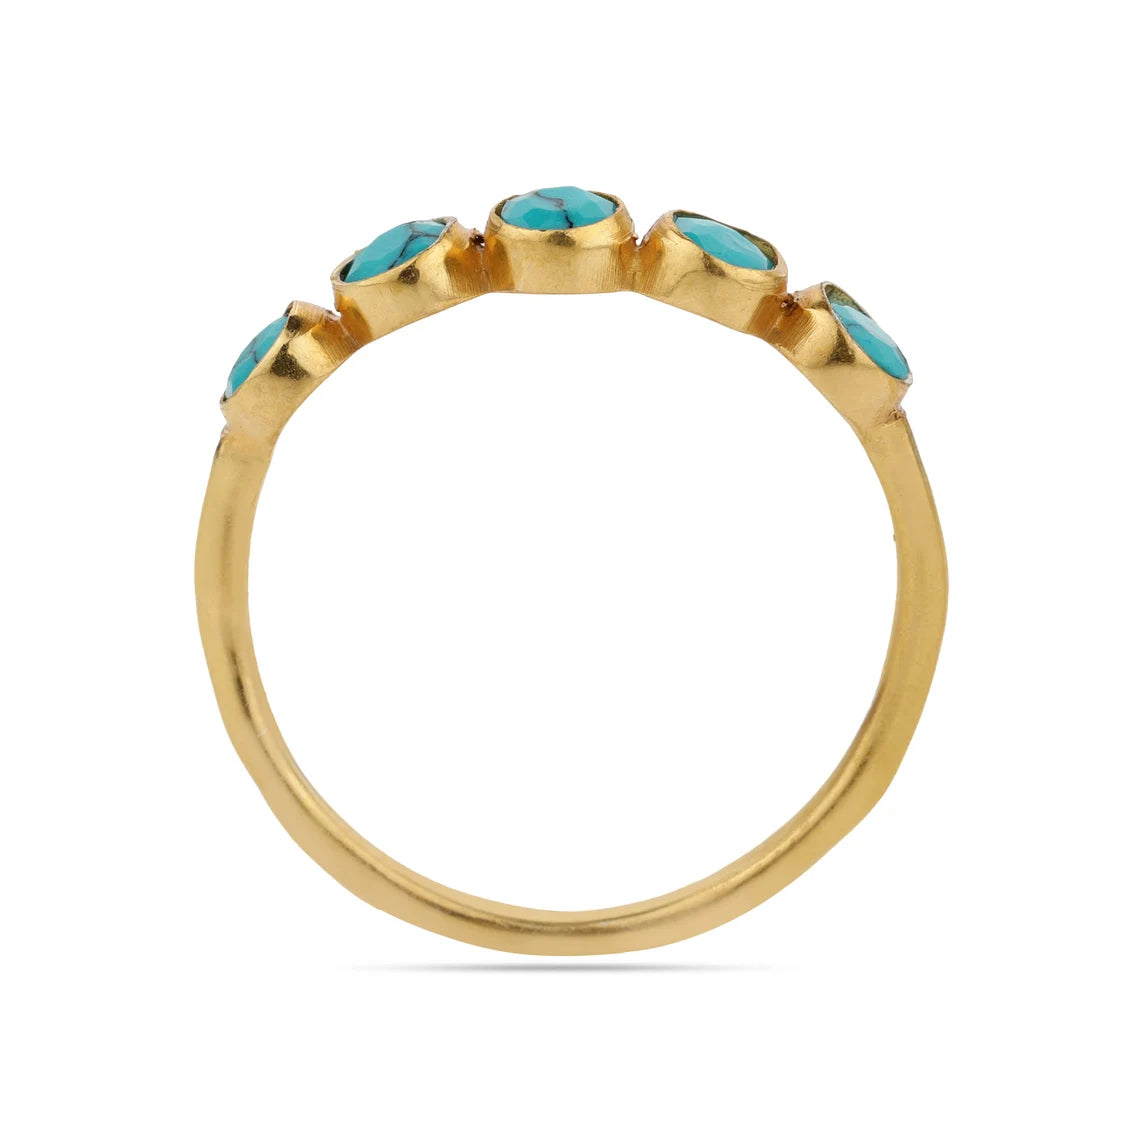 Turquoise Eternity Band Ring - December Birthstone - Half Eternity Ring - Round Turquoise Ring - Bezel Ring - Delicate Ring